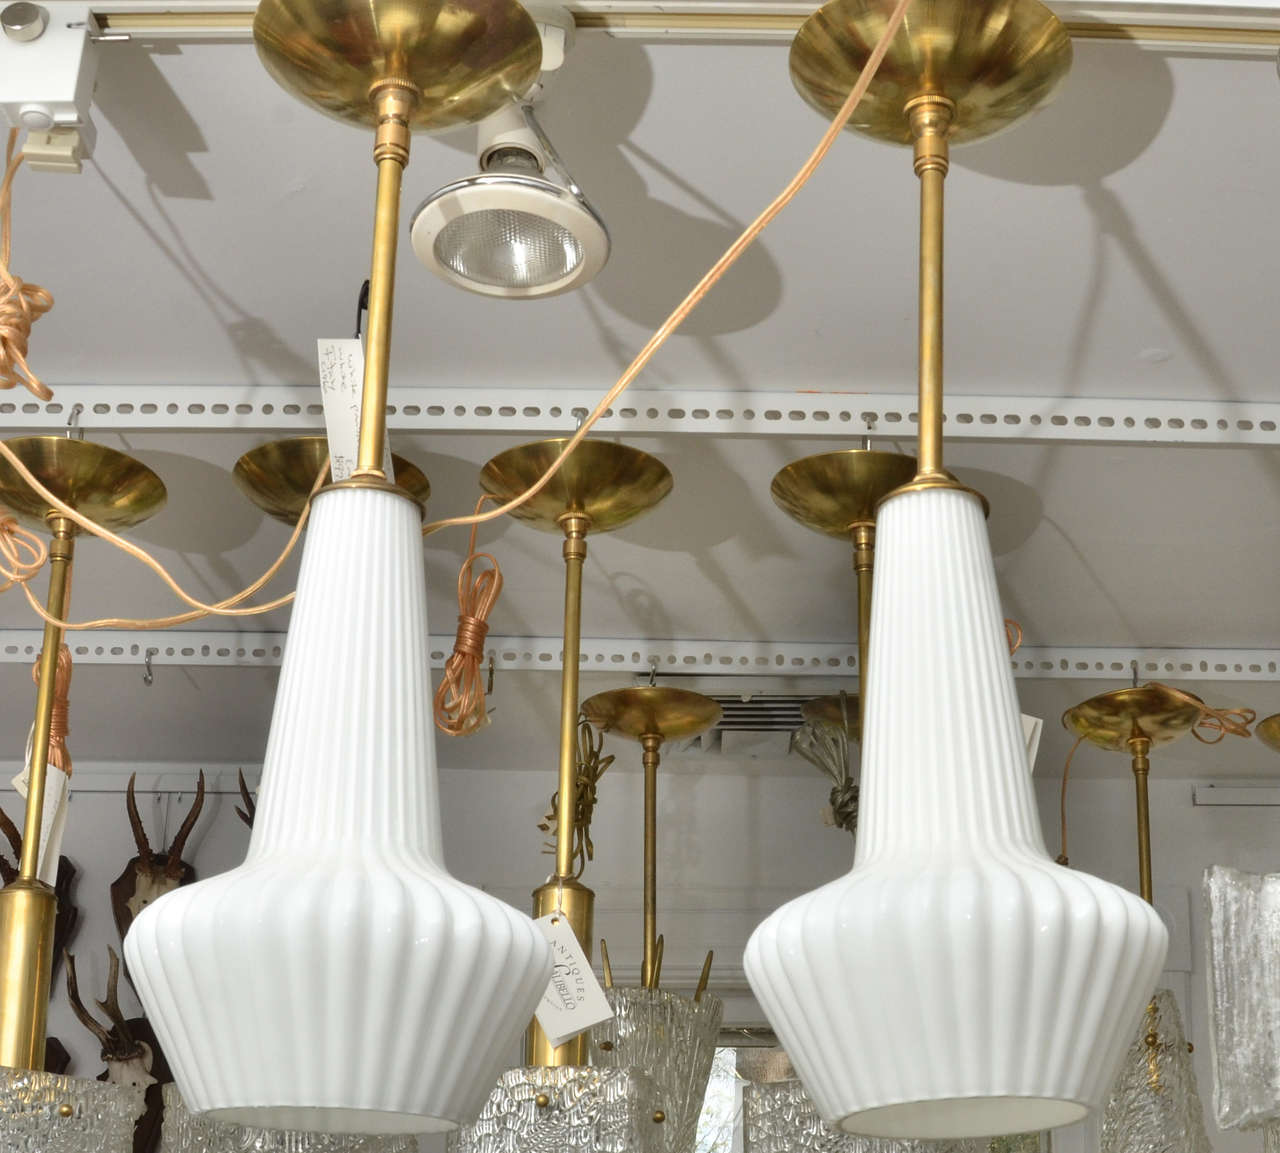 White glass ribbed pendant ceiling fixture with brass details. One standard bulb.